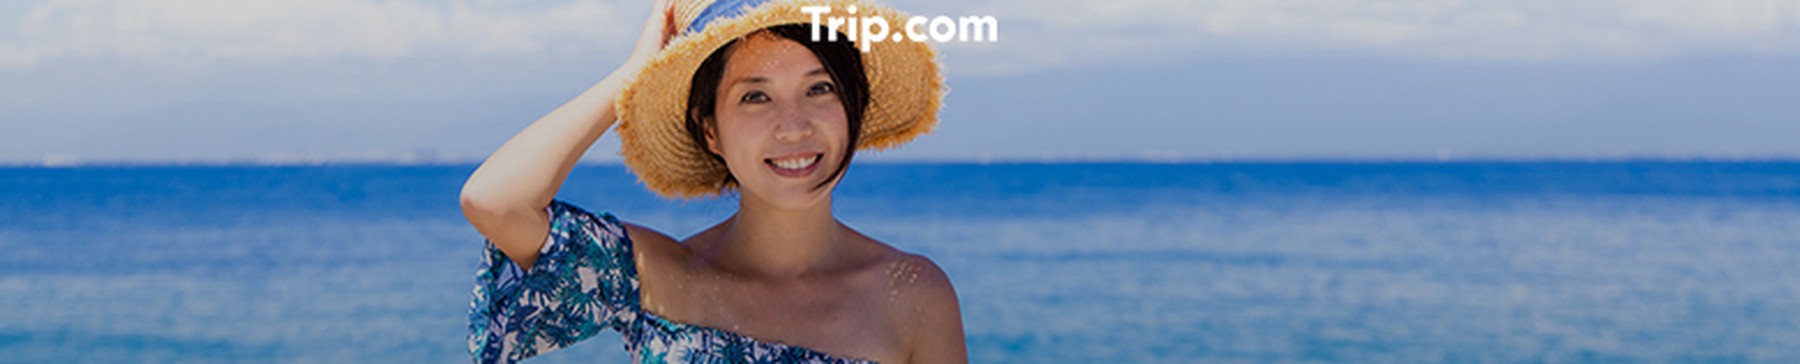 Save up to 8% on tickets using Trip.com